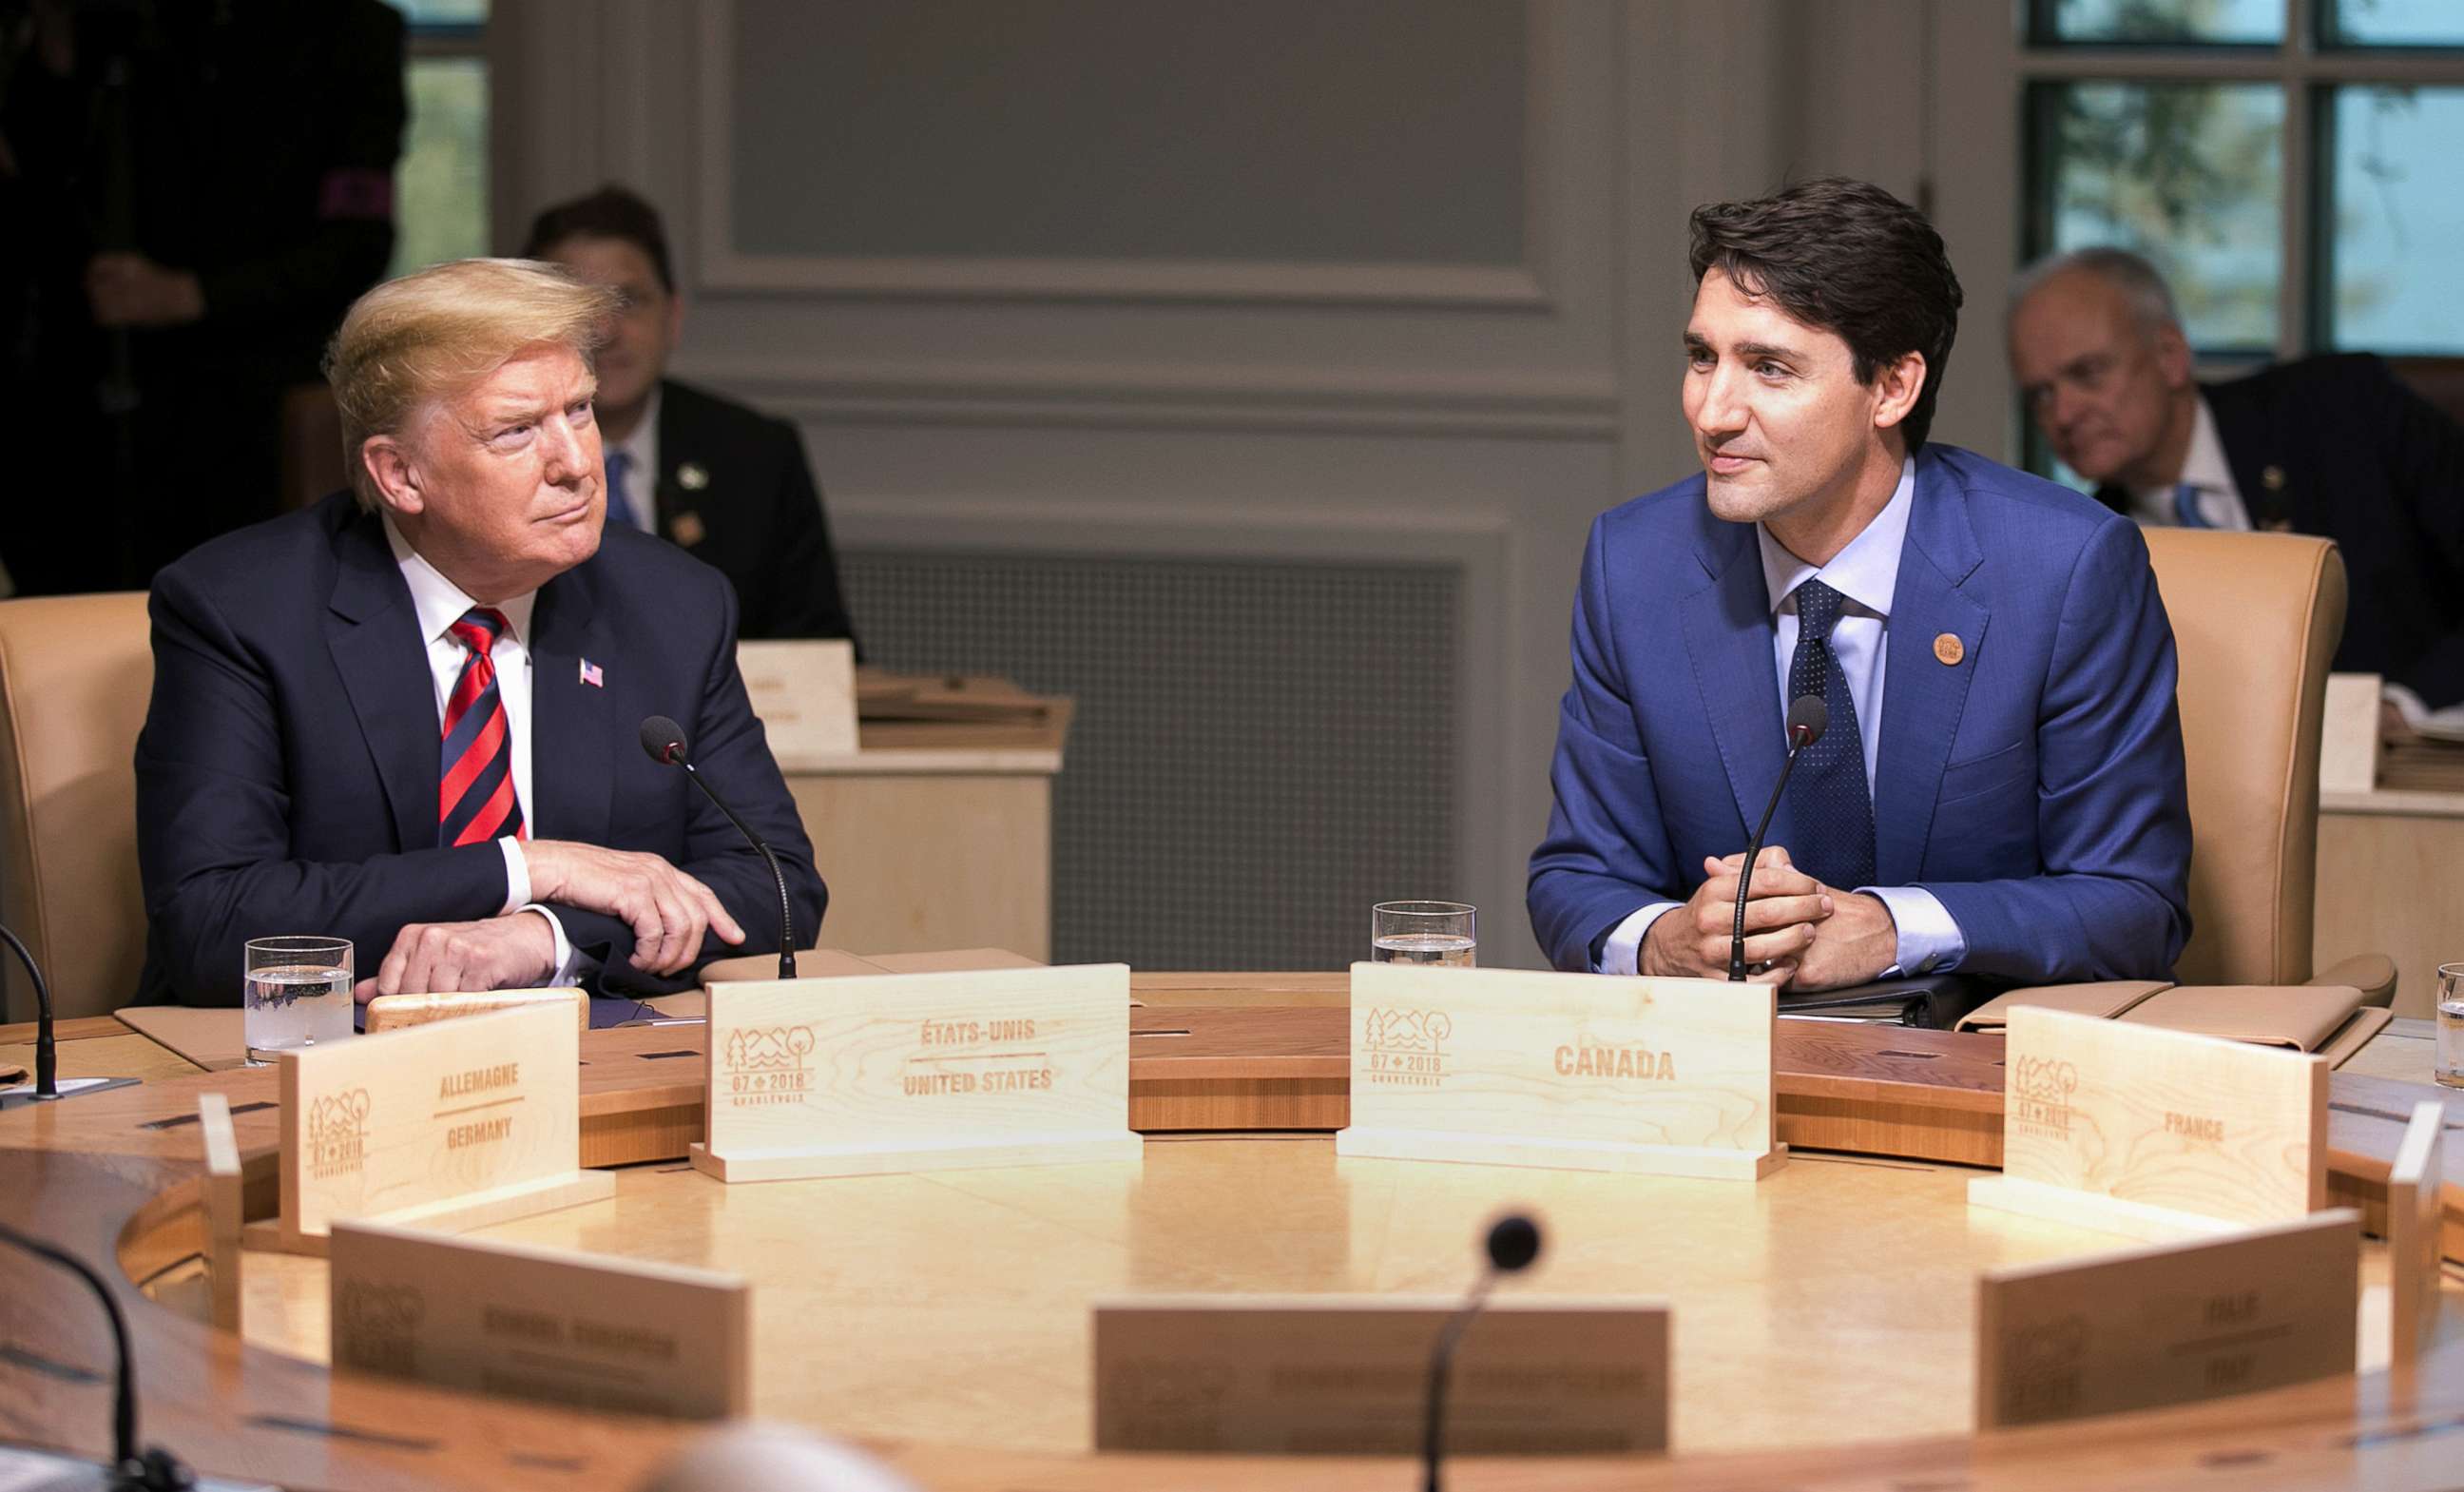 PHOTO: President Donald Trump and Canada's Prime Minister Justin Trudeau participate in the working session at the G7 Summit in Quebec, Canada, June 8, 2018.